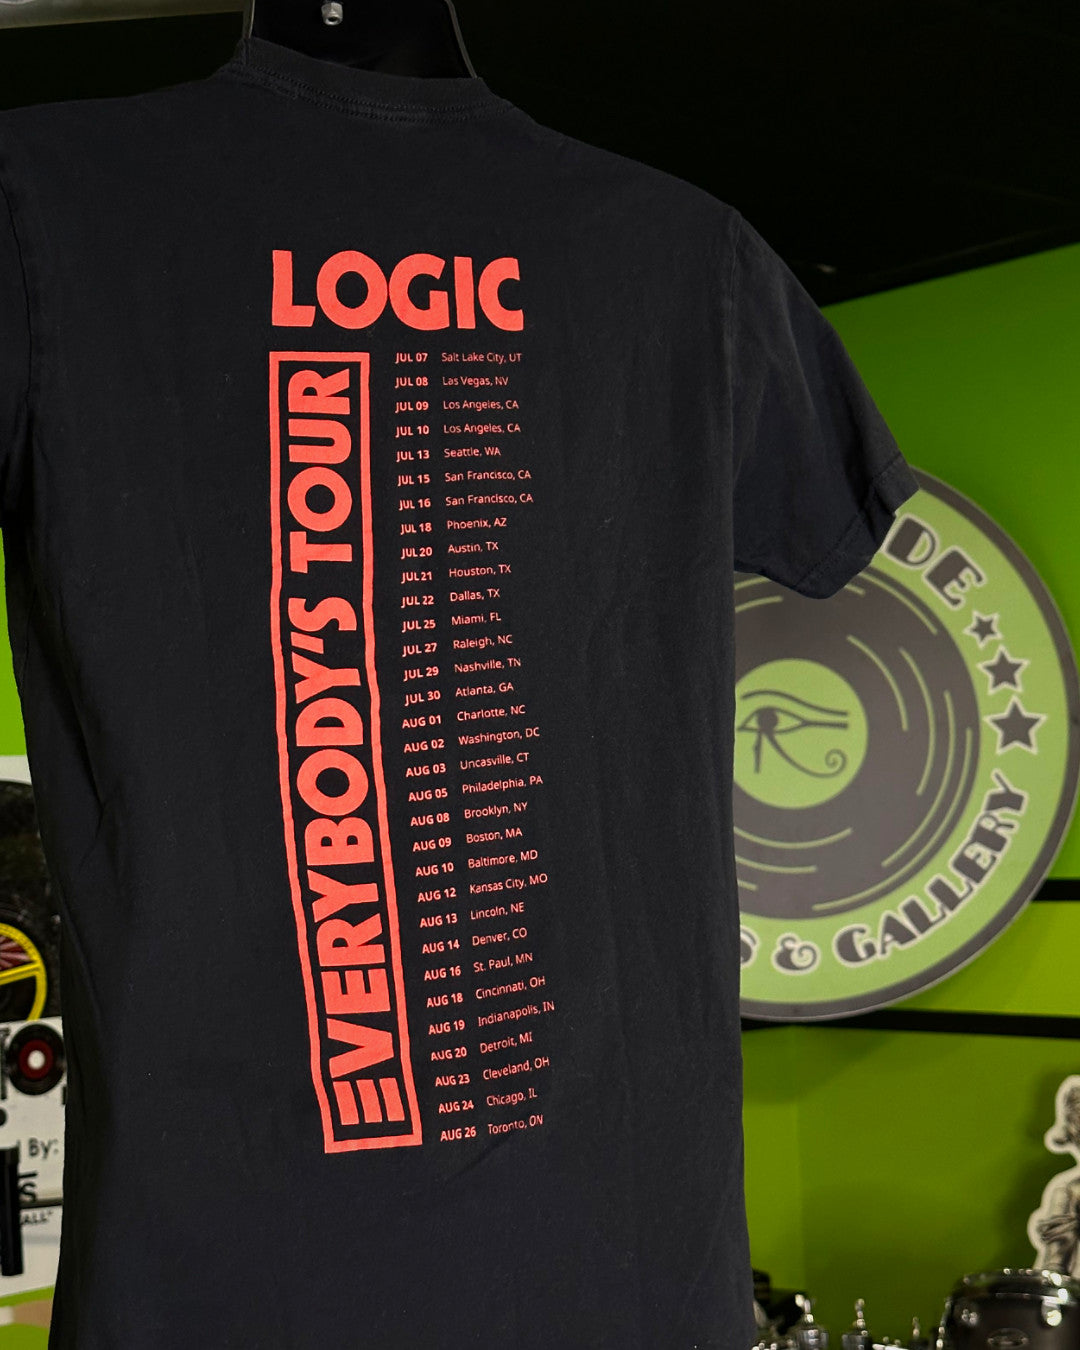 Logic 2017 Everybody's Tour T-Shirt, Blk, S - Darkside Records